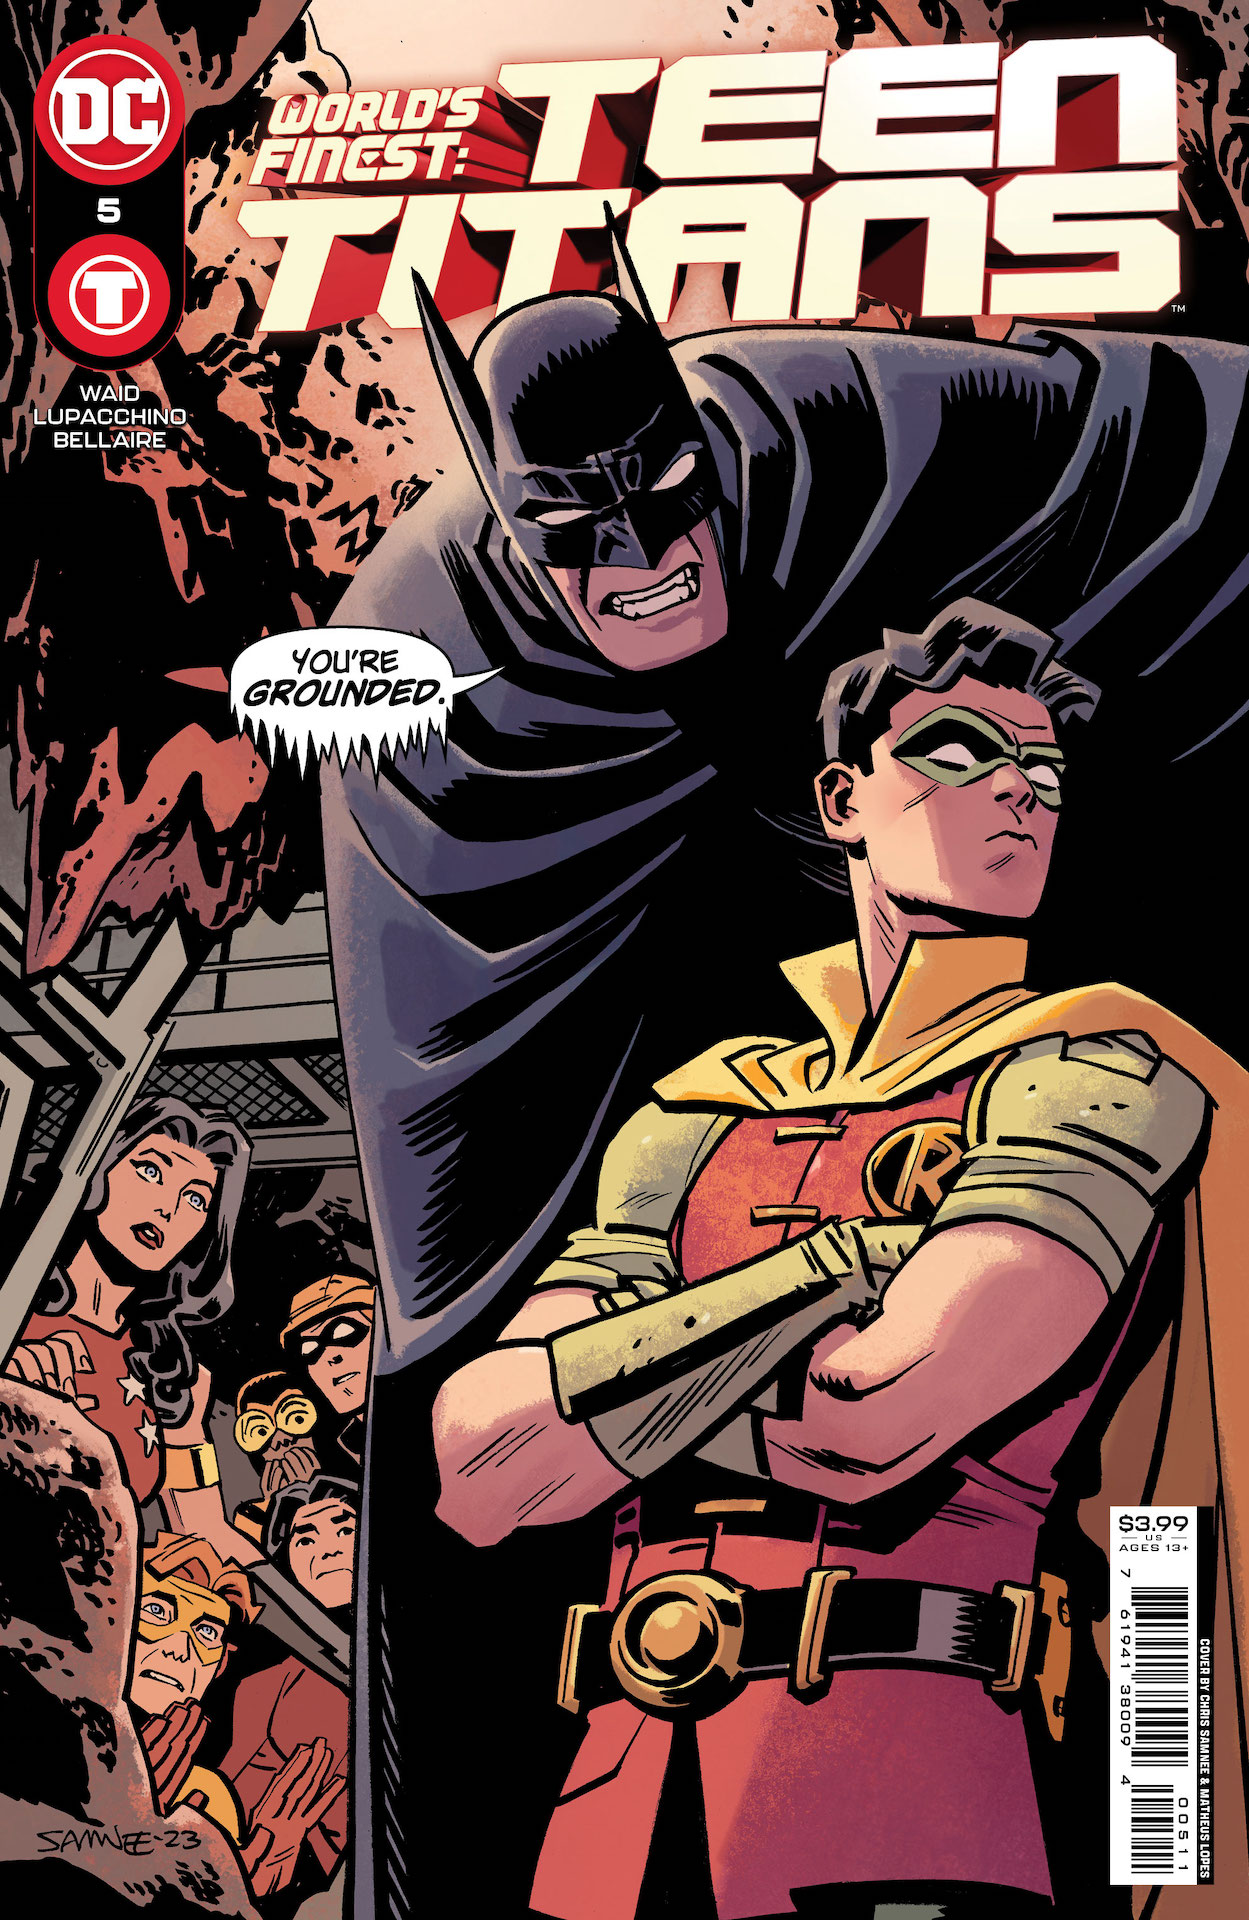 DC Preview: World's Finest: Teen Titans #5